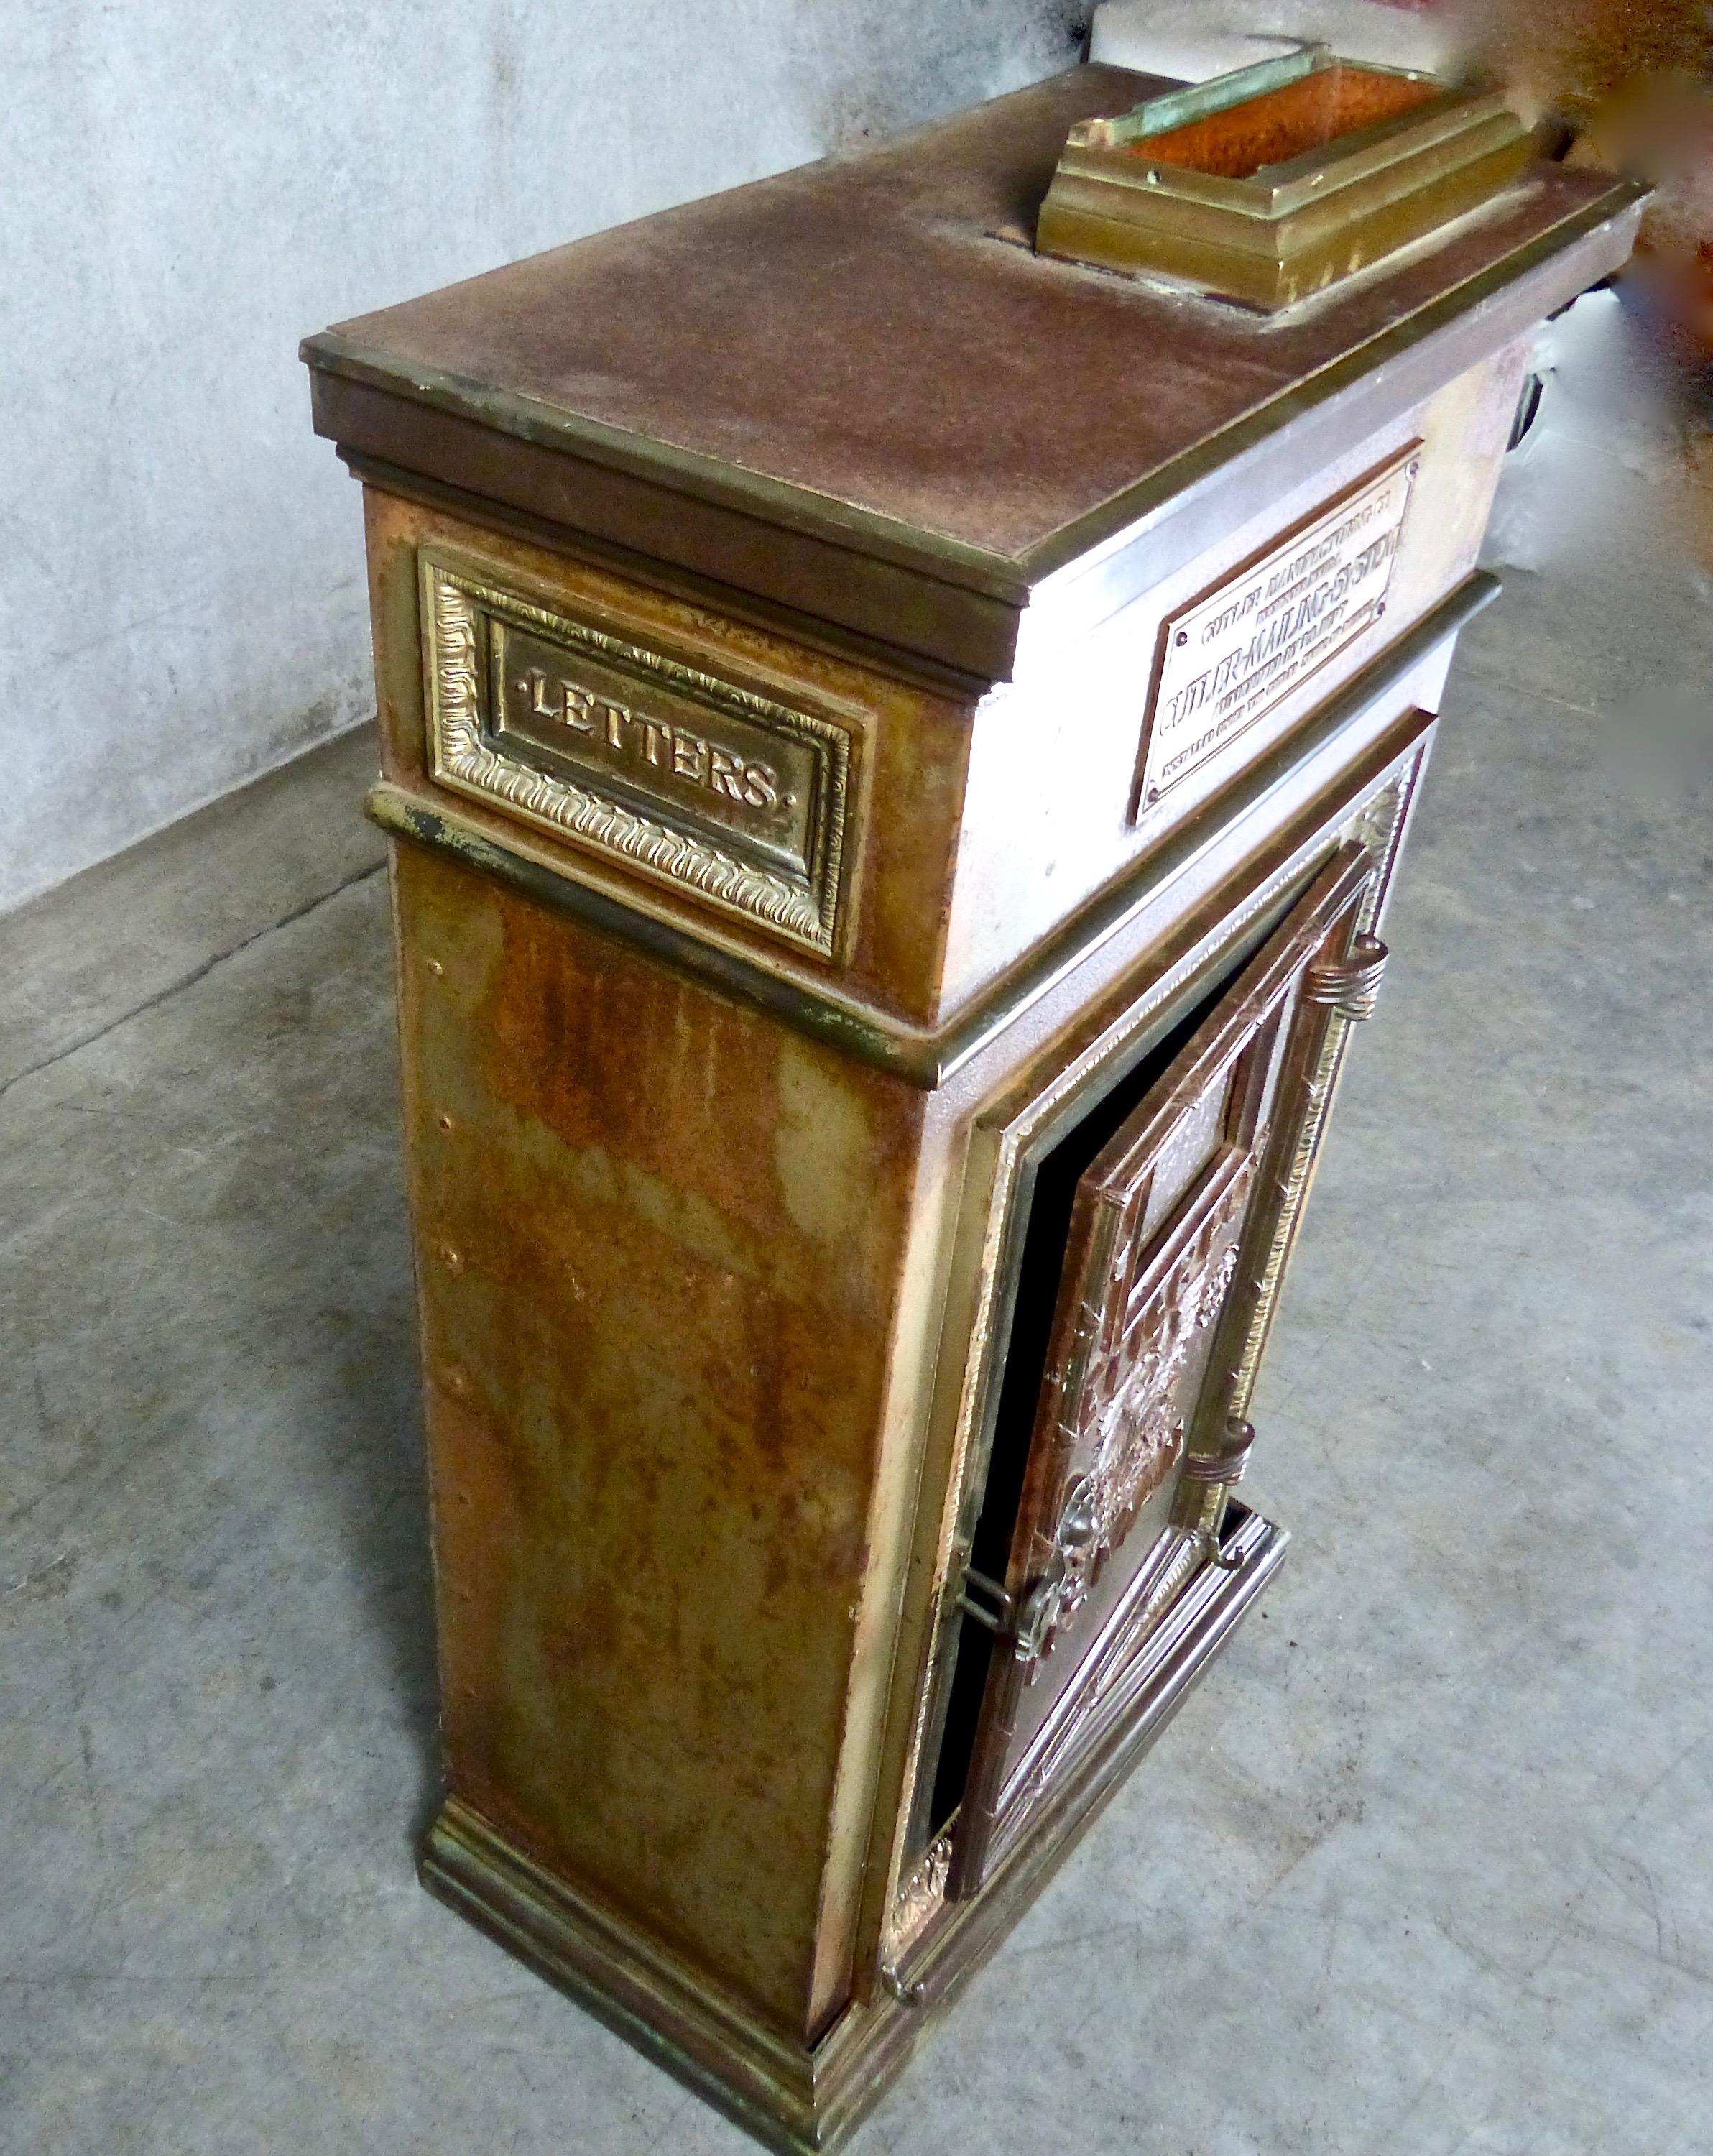 American U.S. Post Office Letterbox and Chute by Cutler Mfg, circa 1920s